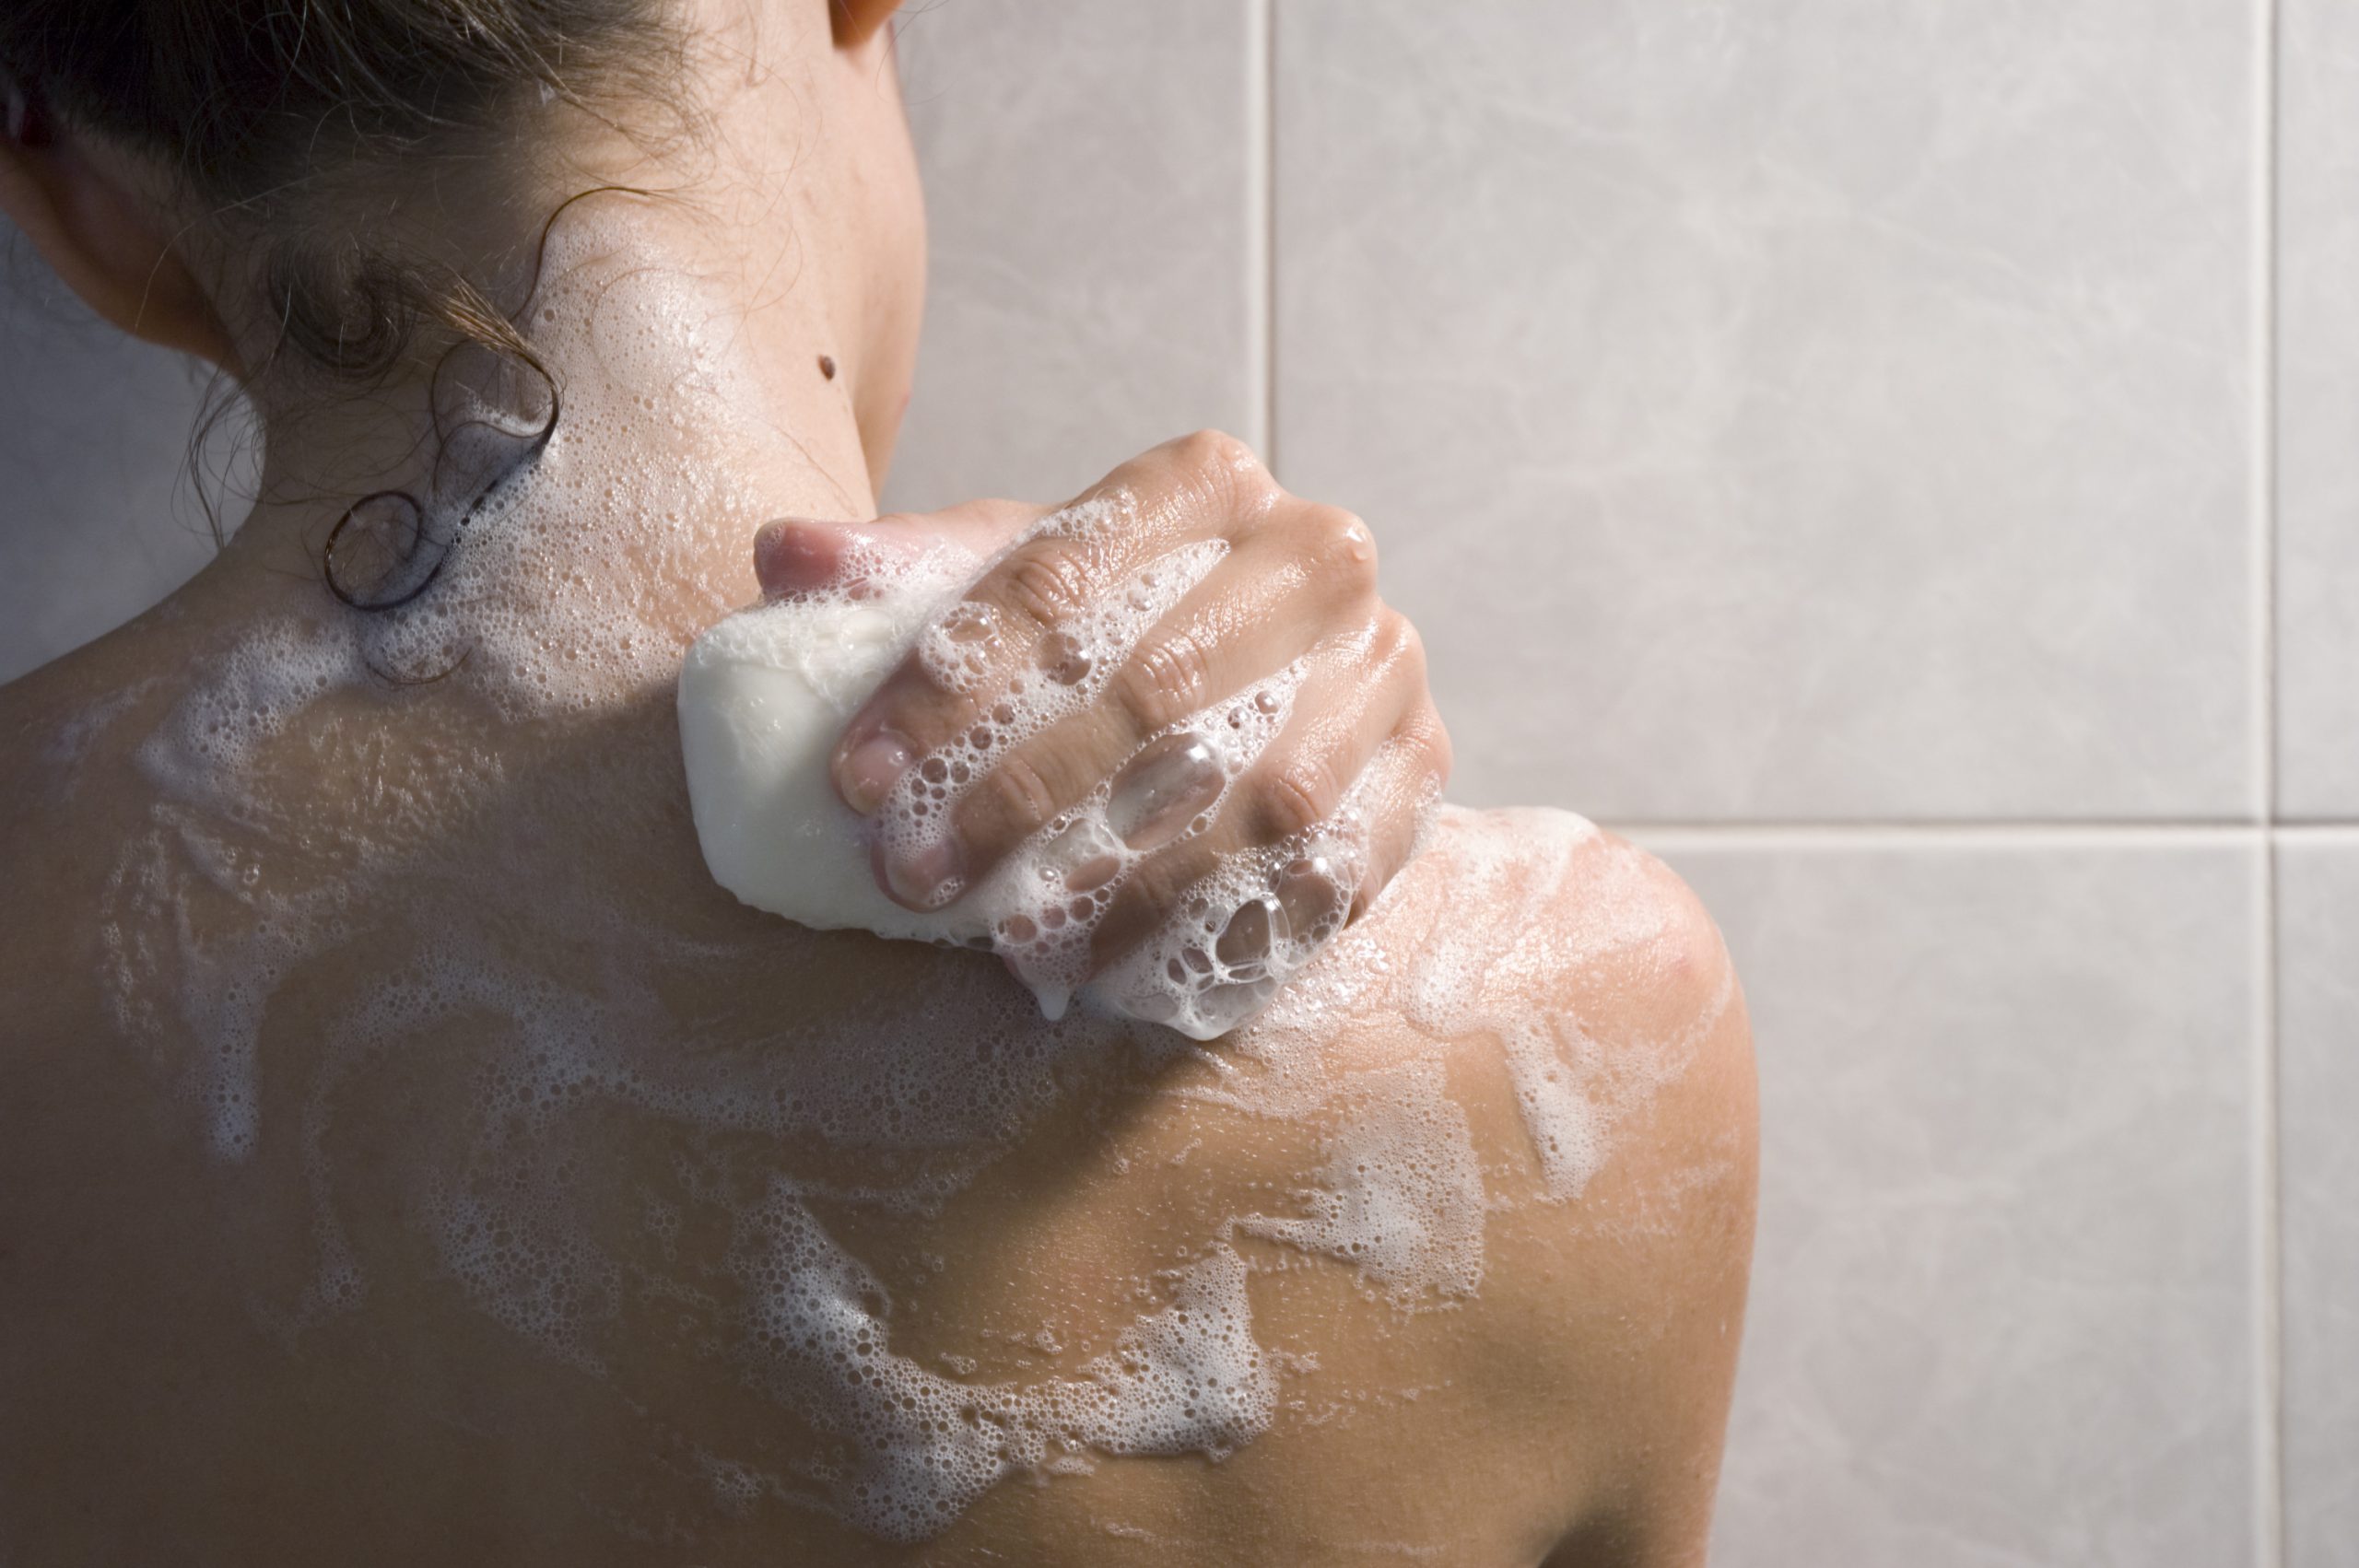 How not to wash away your skin’s natural barrier and cancer protection